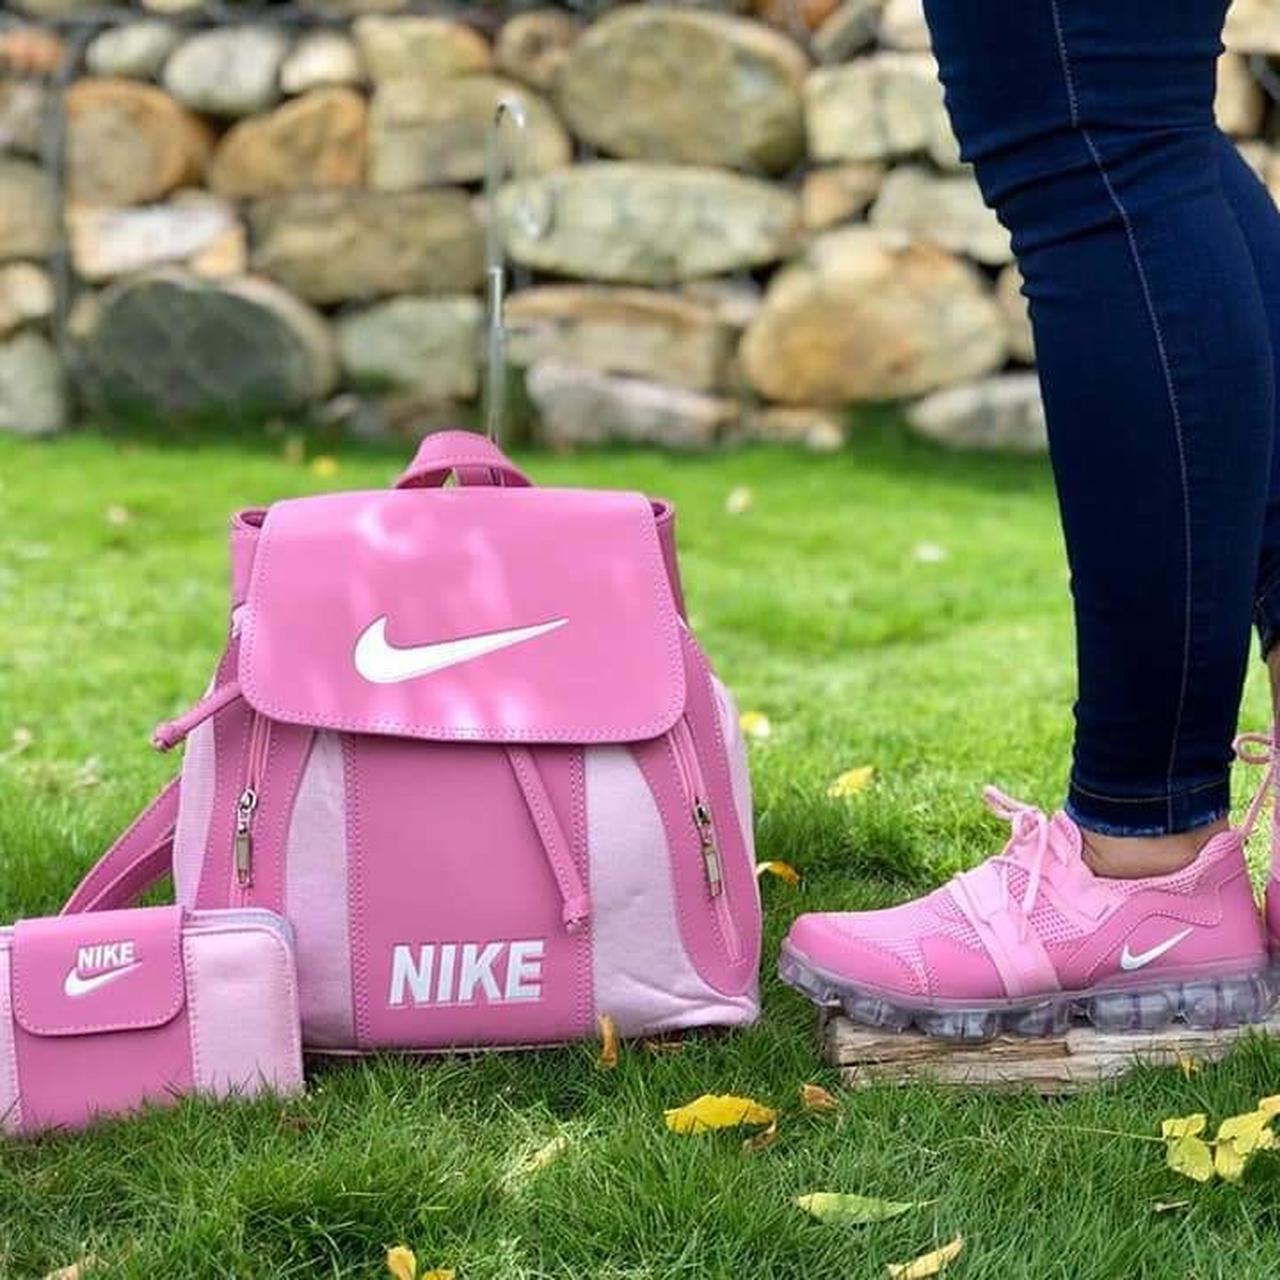 Matching Nike Shoes With Purse $175😎 - K'Adore Kollection